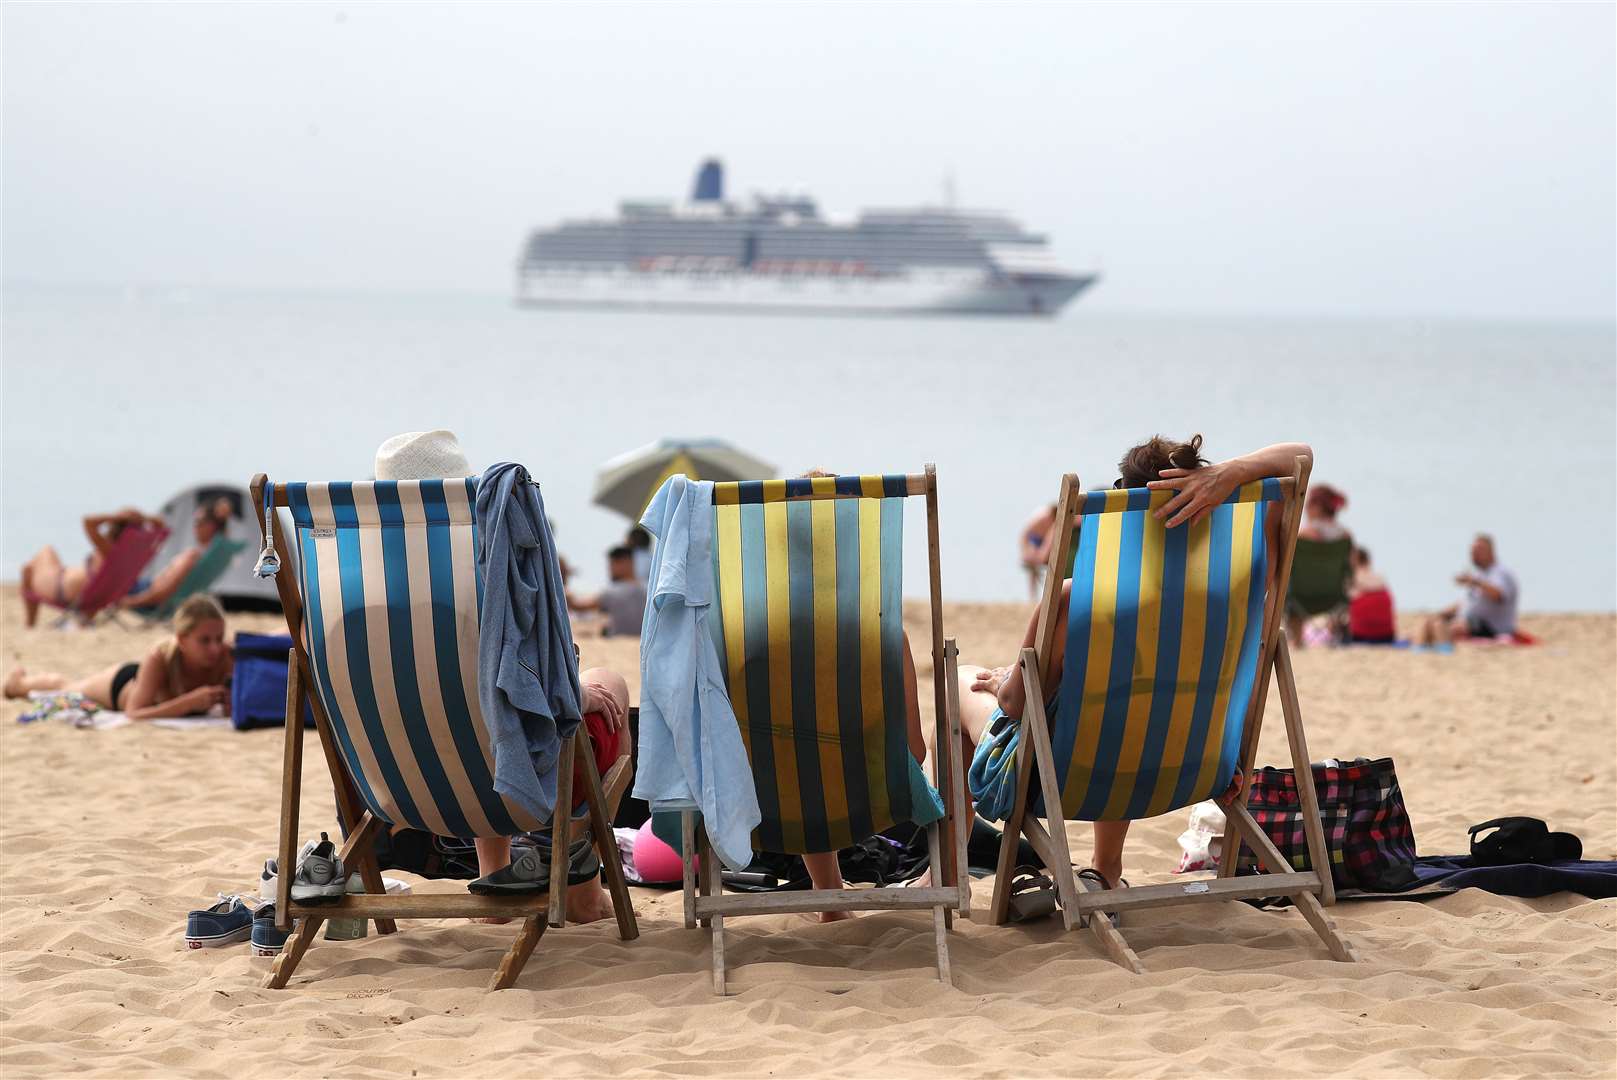 People enjoy the hot weather on Boscombe beach in Dorset, on August 8 (Andrew Matthews/PA)